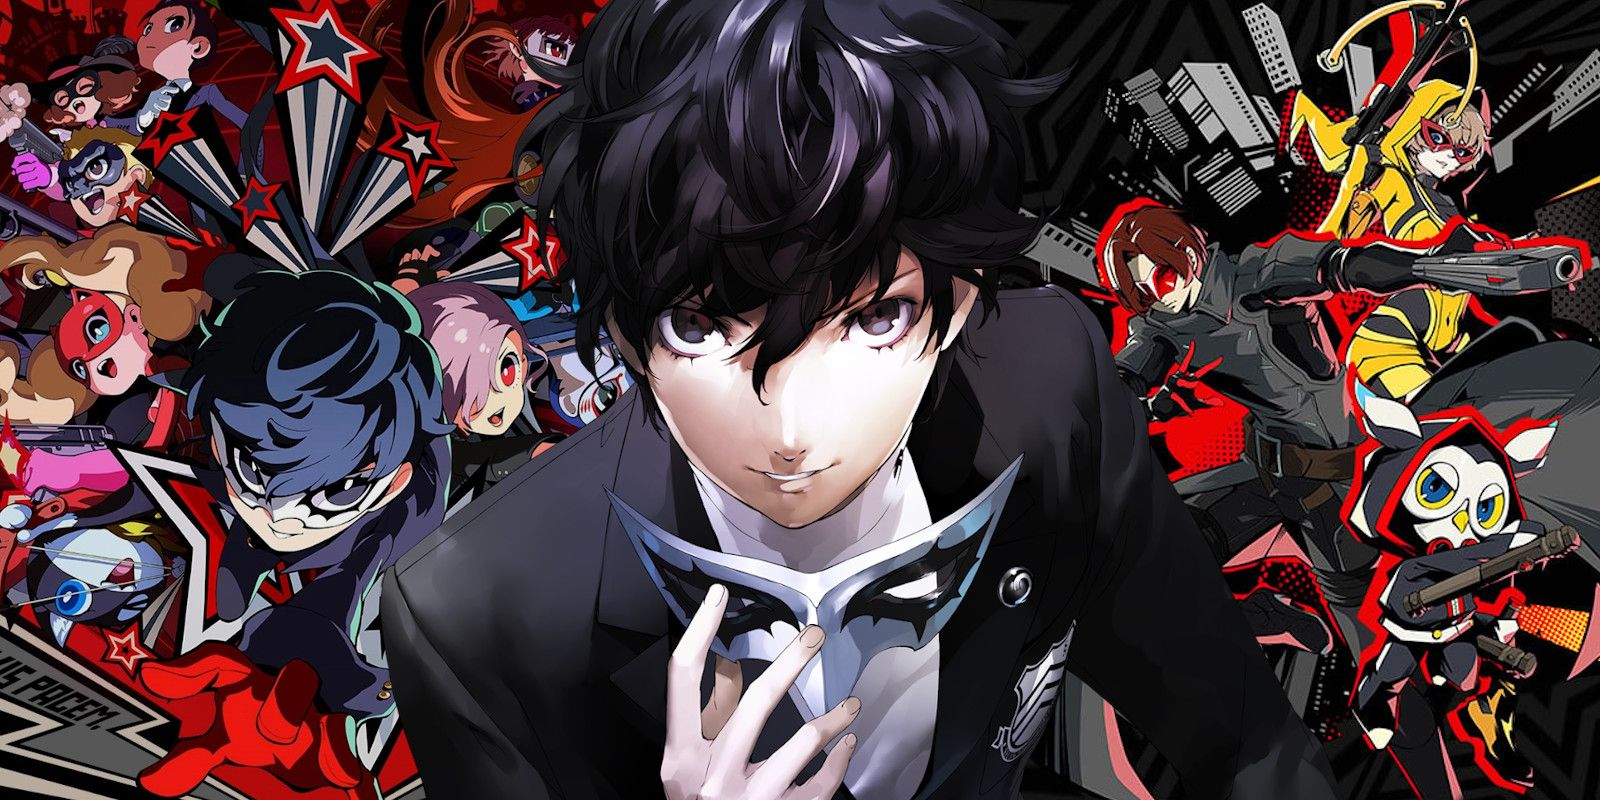 Persona 5 Royal - Official Opening Cinematic Trailer 